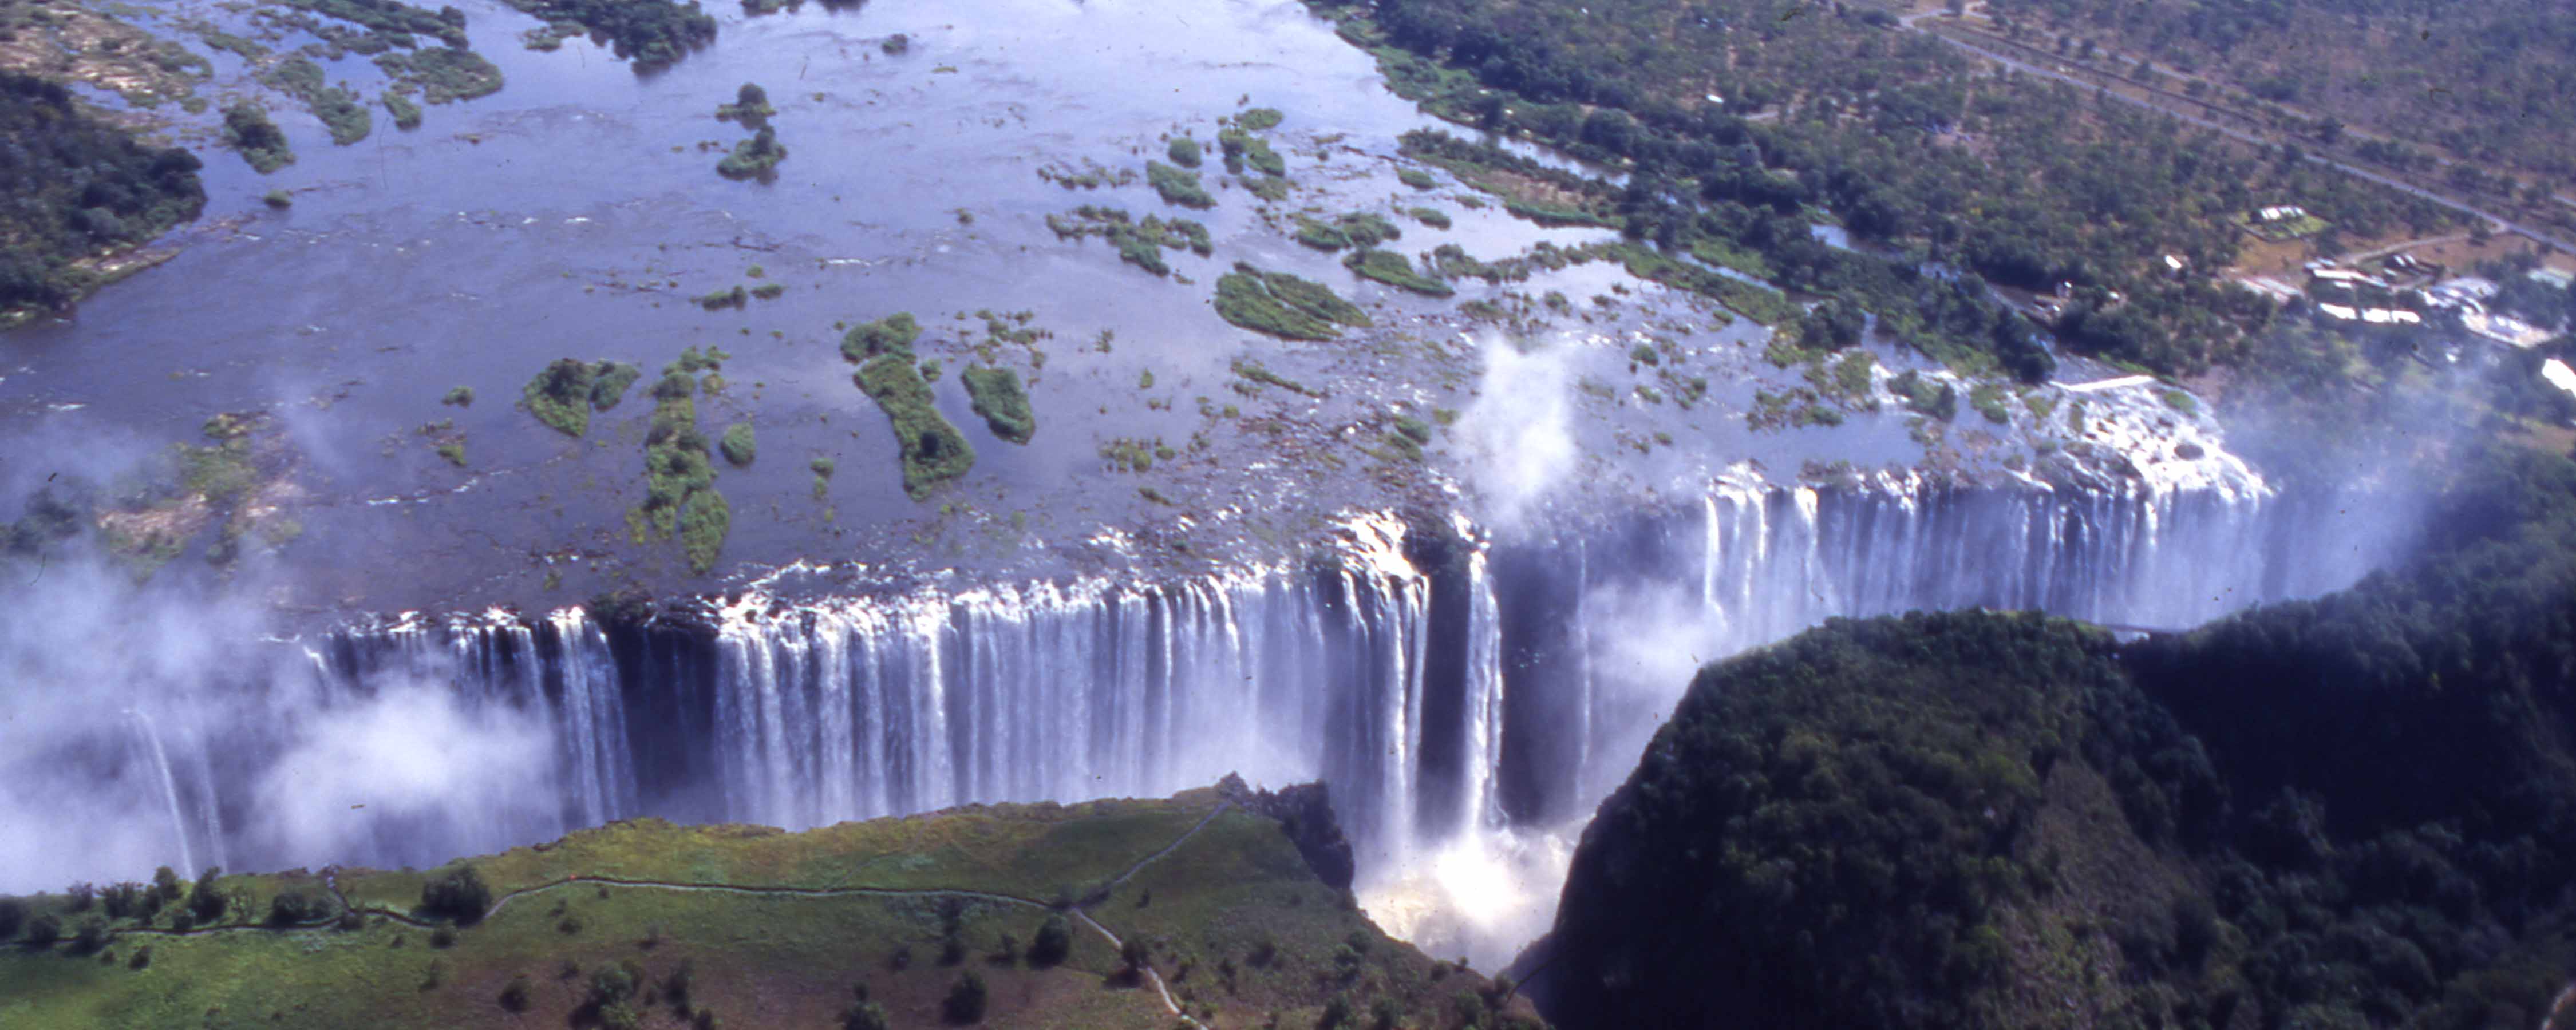 UNWTO overwhelms Vic Falls